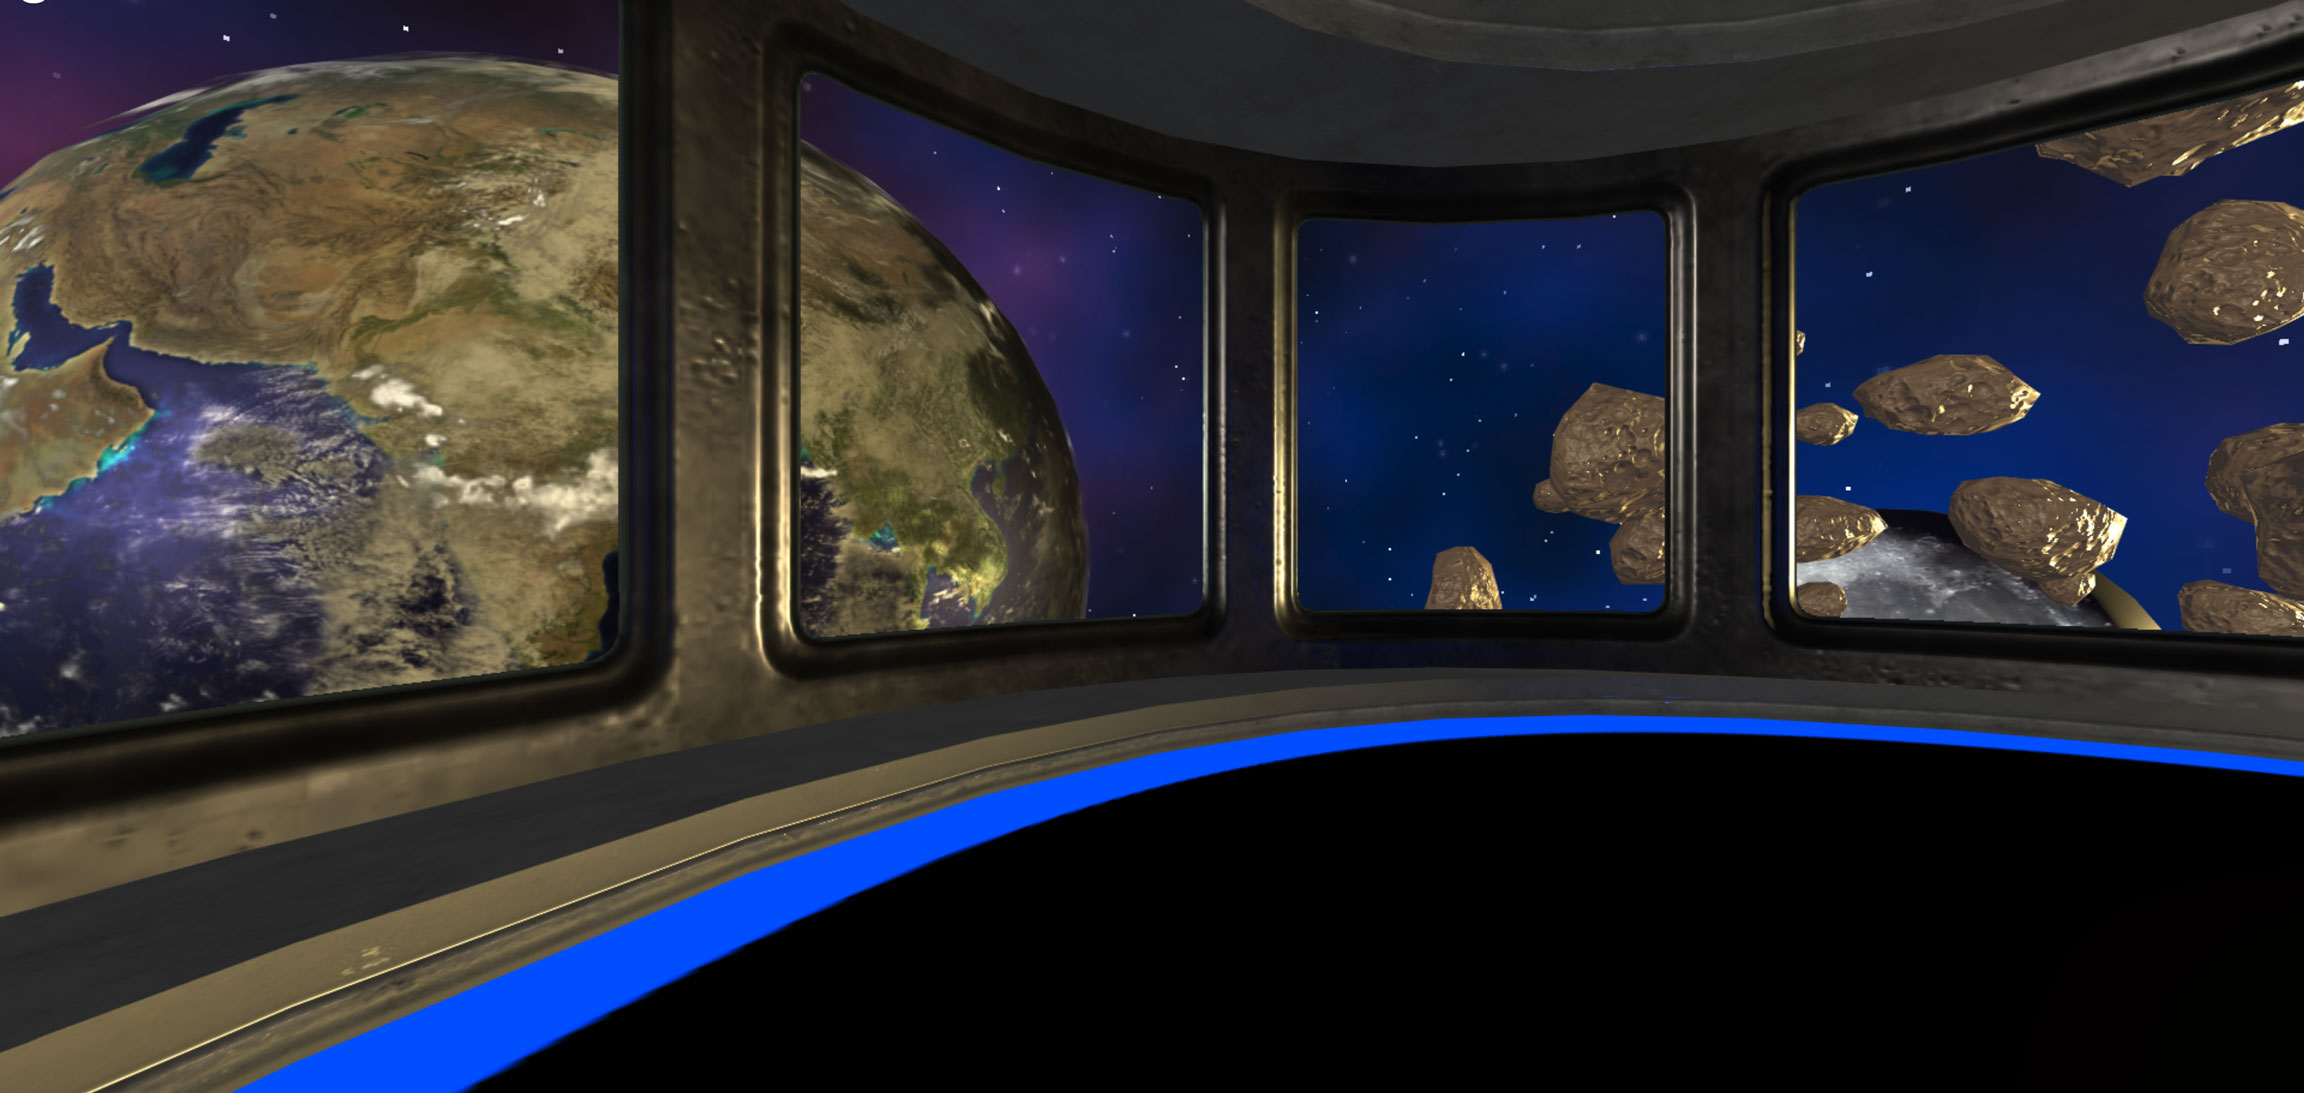 A view looking out of the space station windows at Earth, the top of the moon, and asteroids floating in space.